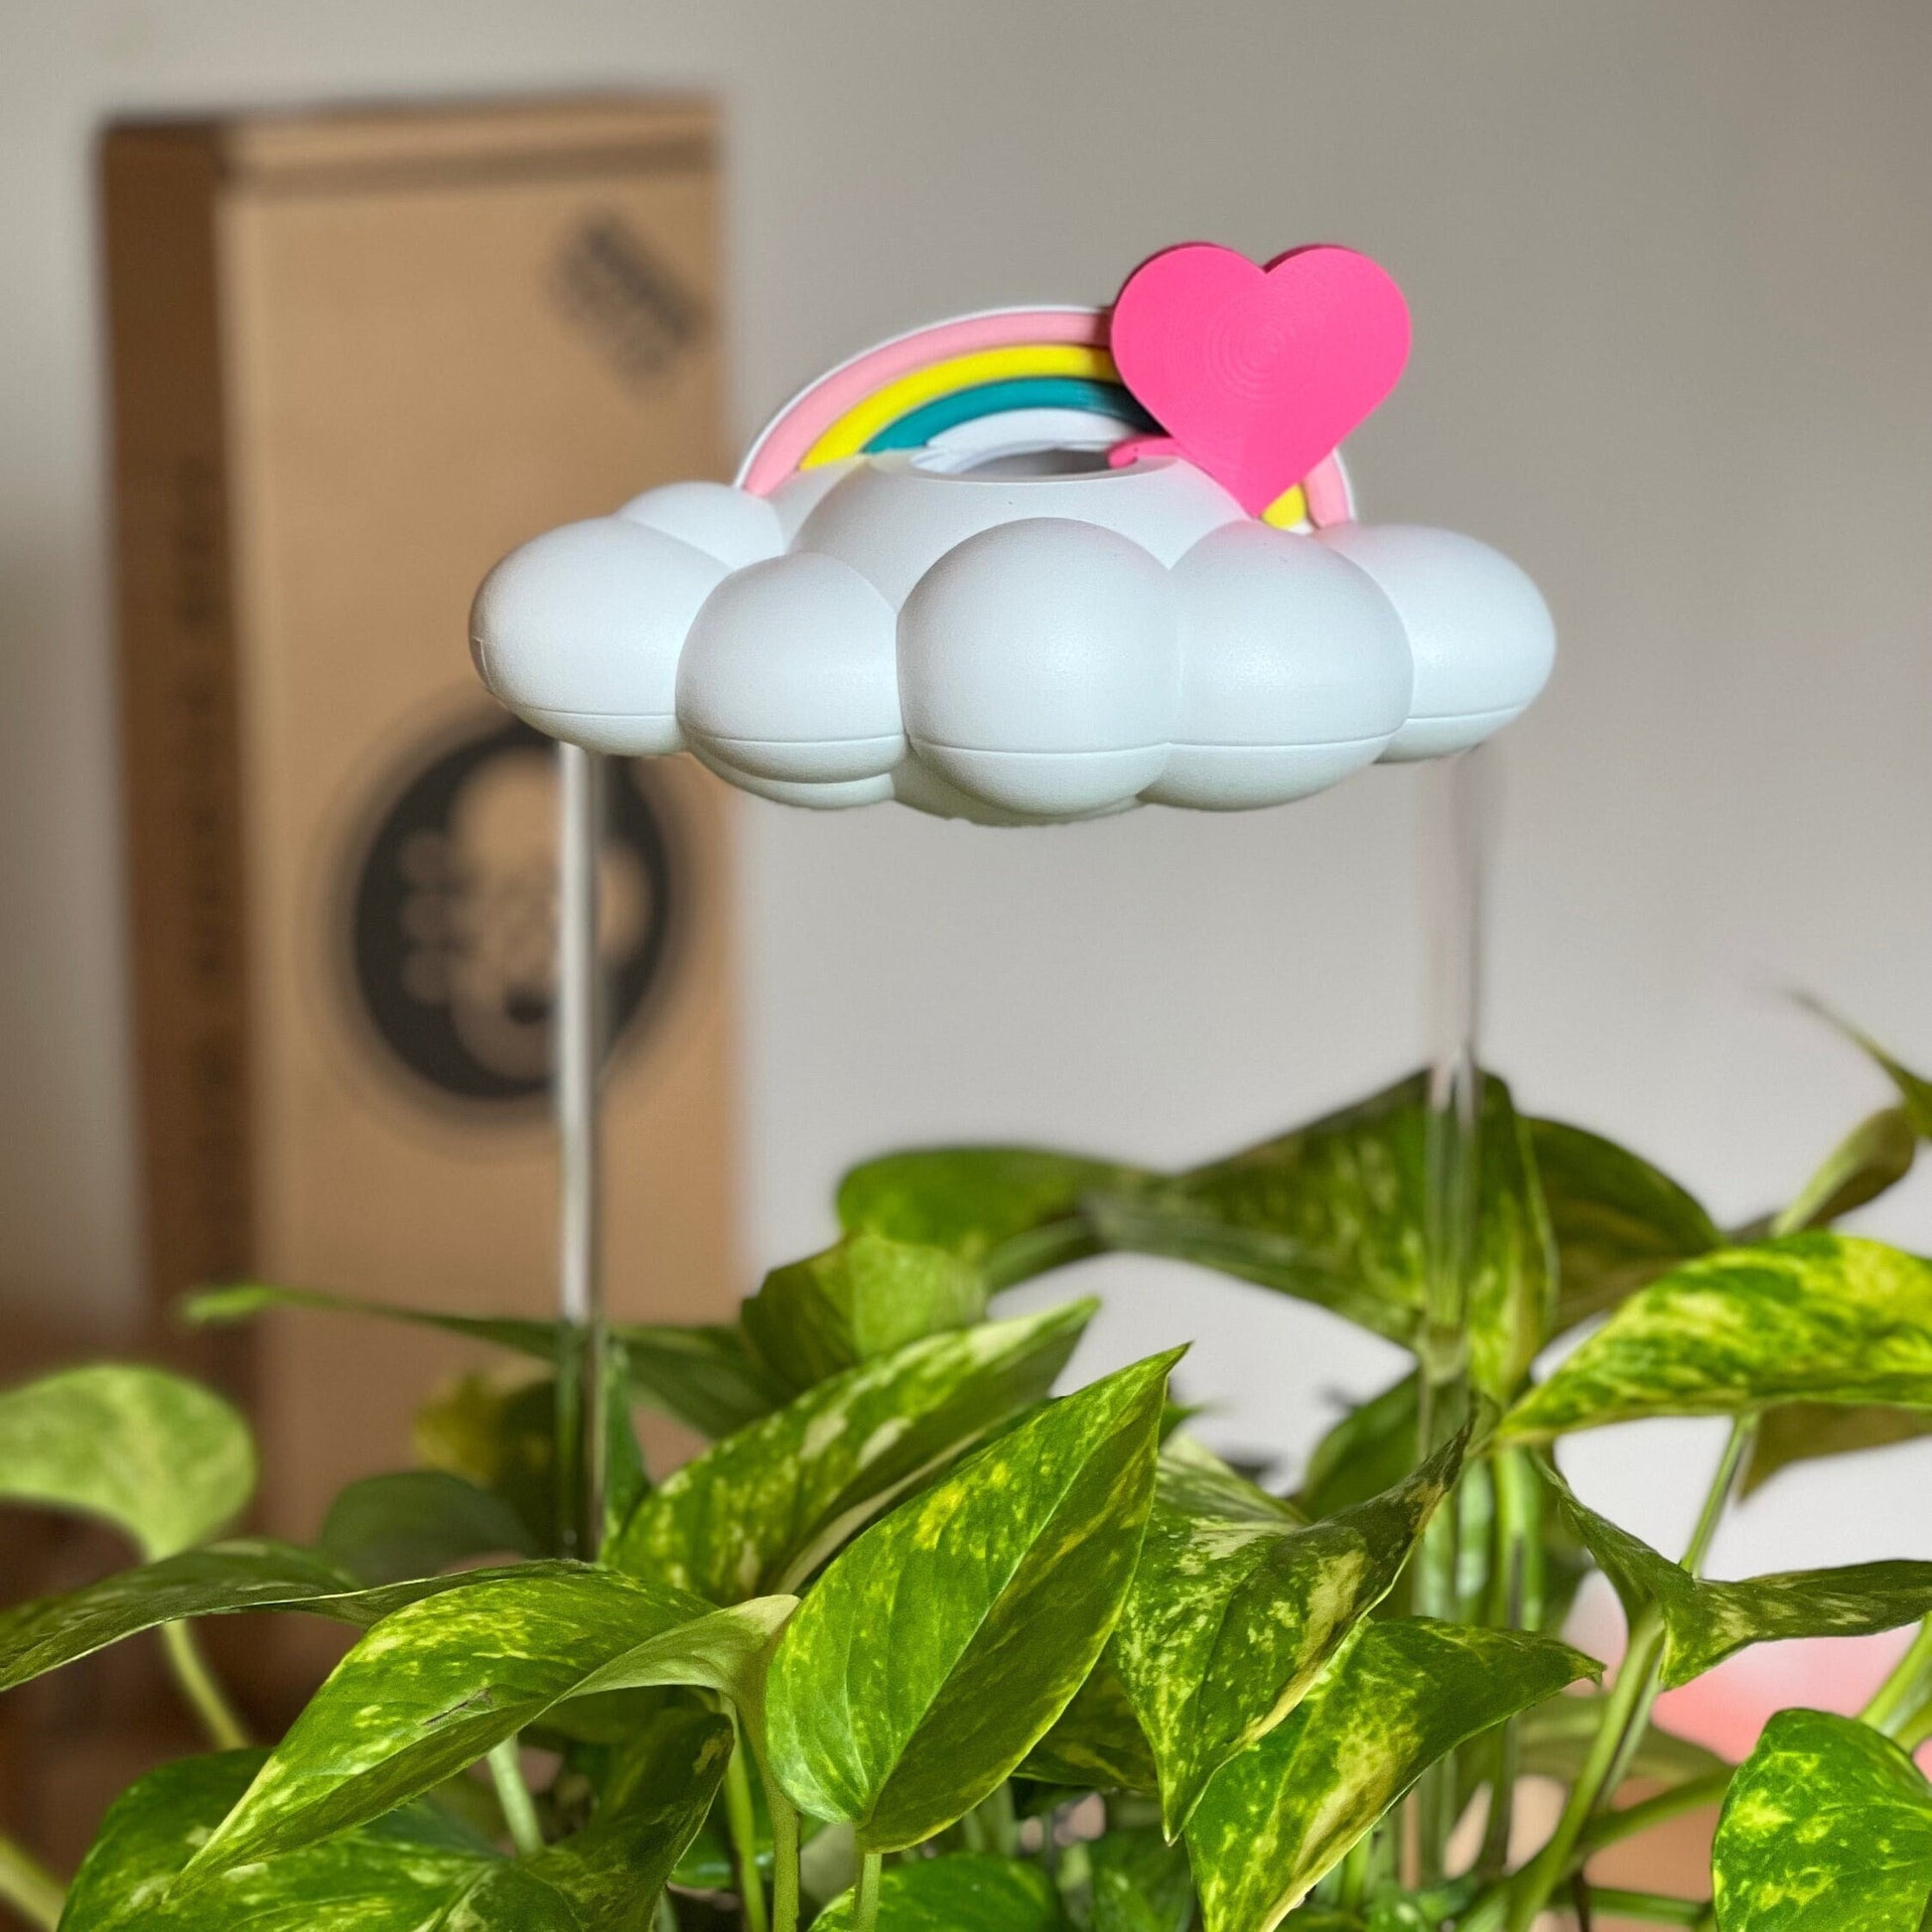 Original Dripping Rain Cloud by THE CLOUD MAKERS with Pink Heart and Pastel Rainbow Charms